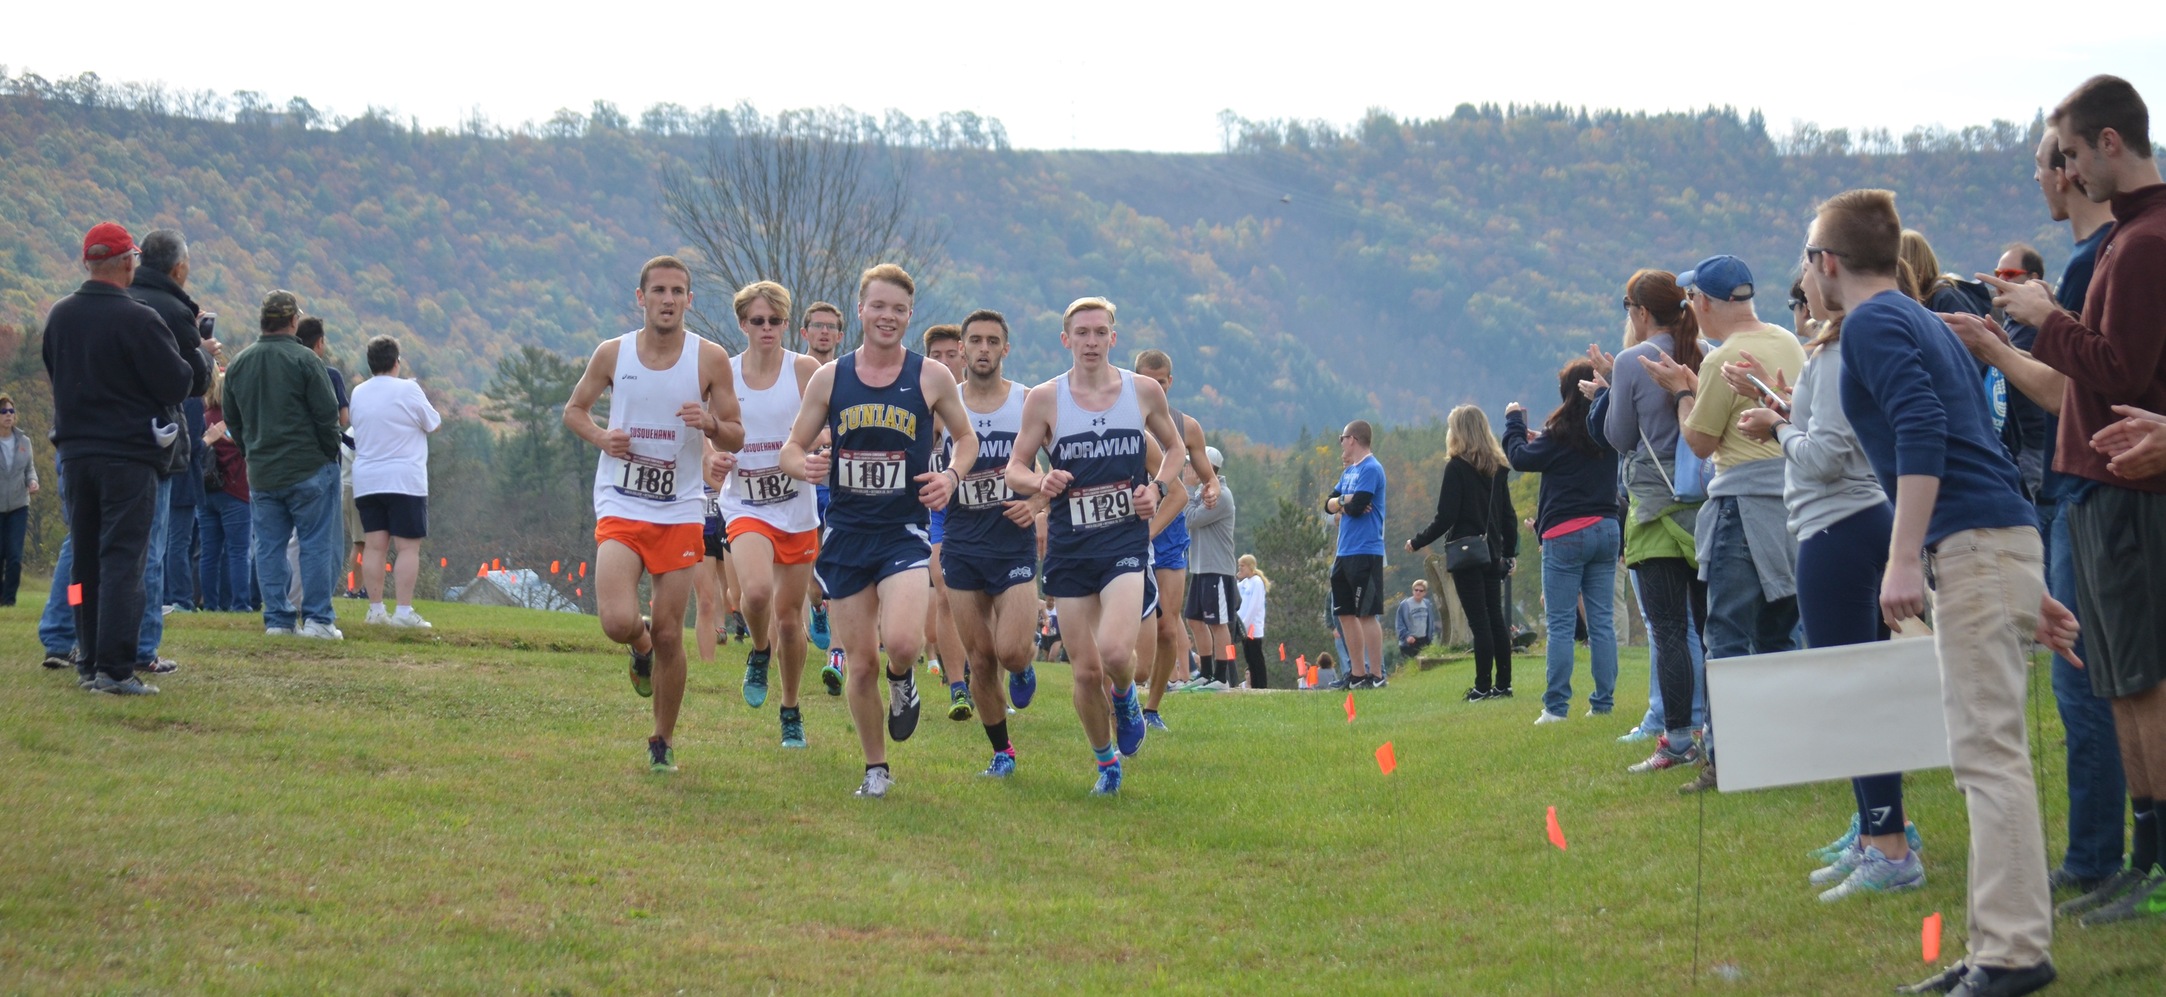 Men’s Cross Country Places Second at Landmark Championships